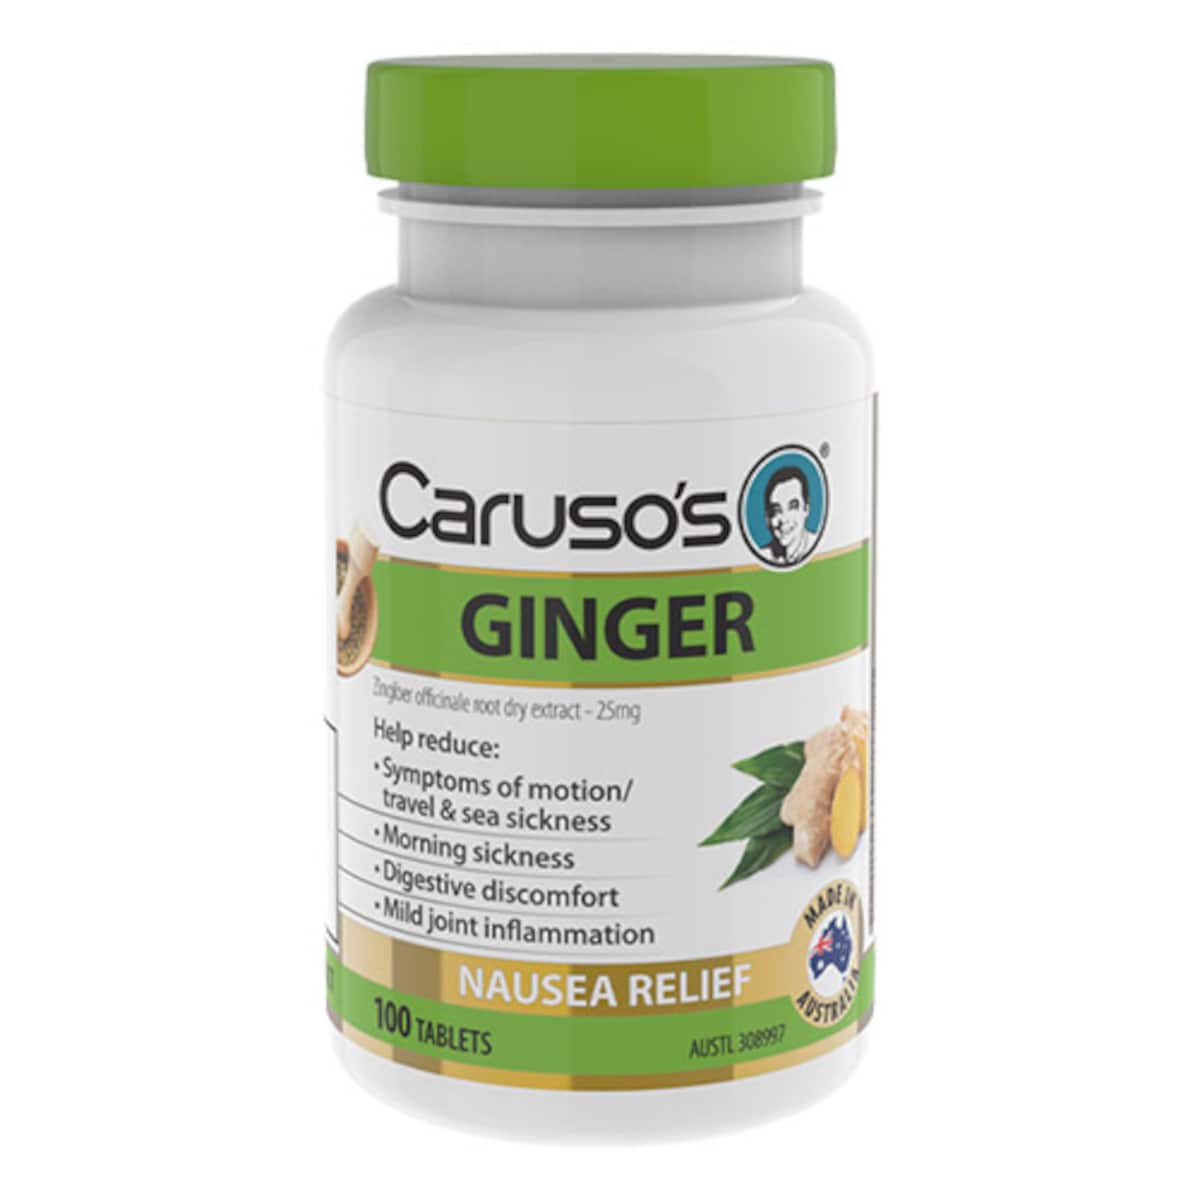 Carusos Ginger Nausea Relief 100 Tablets